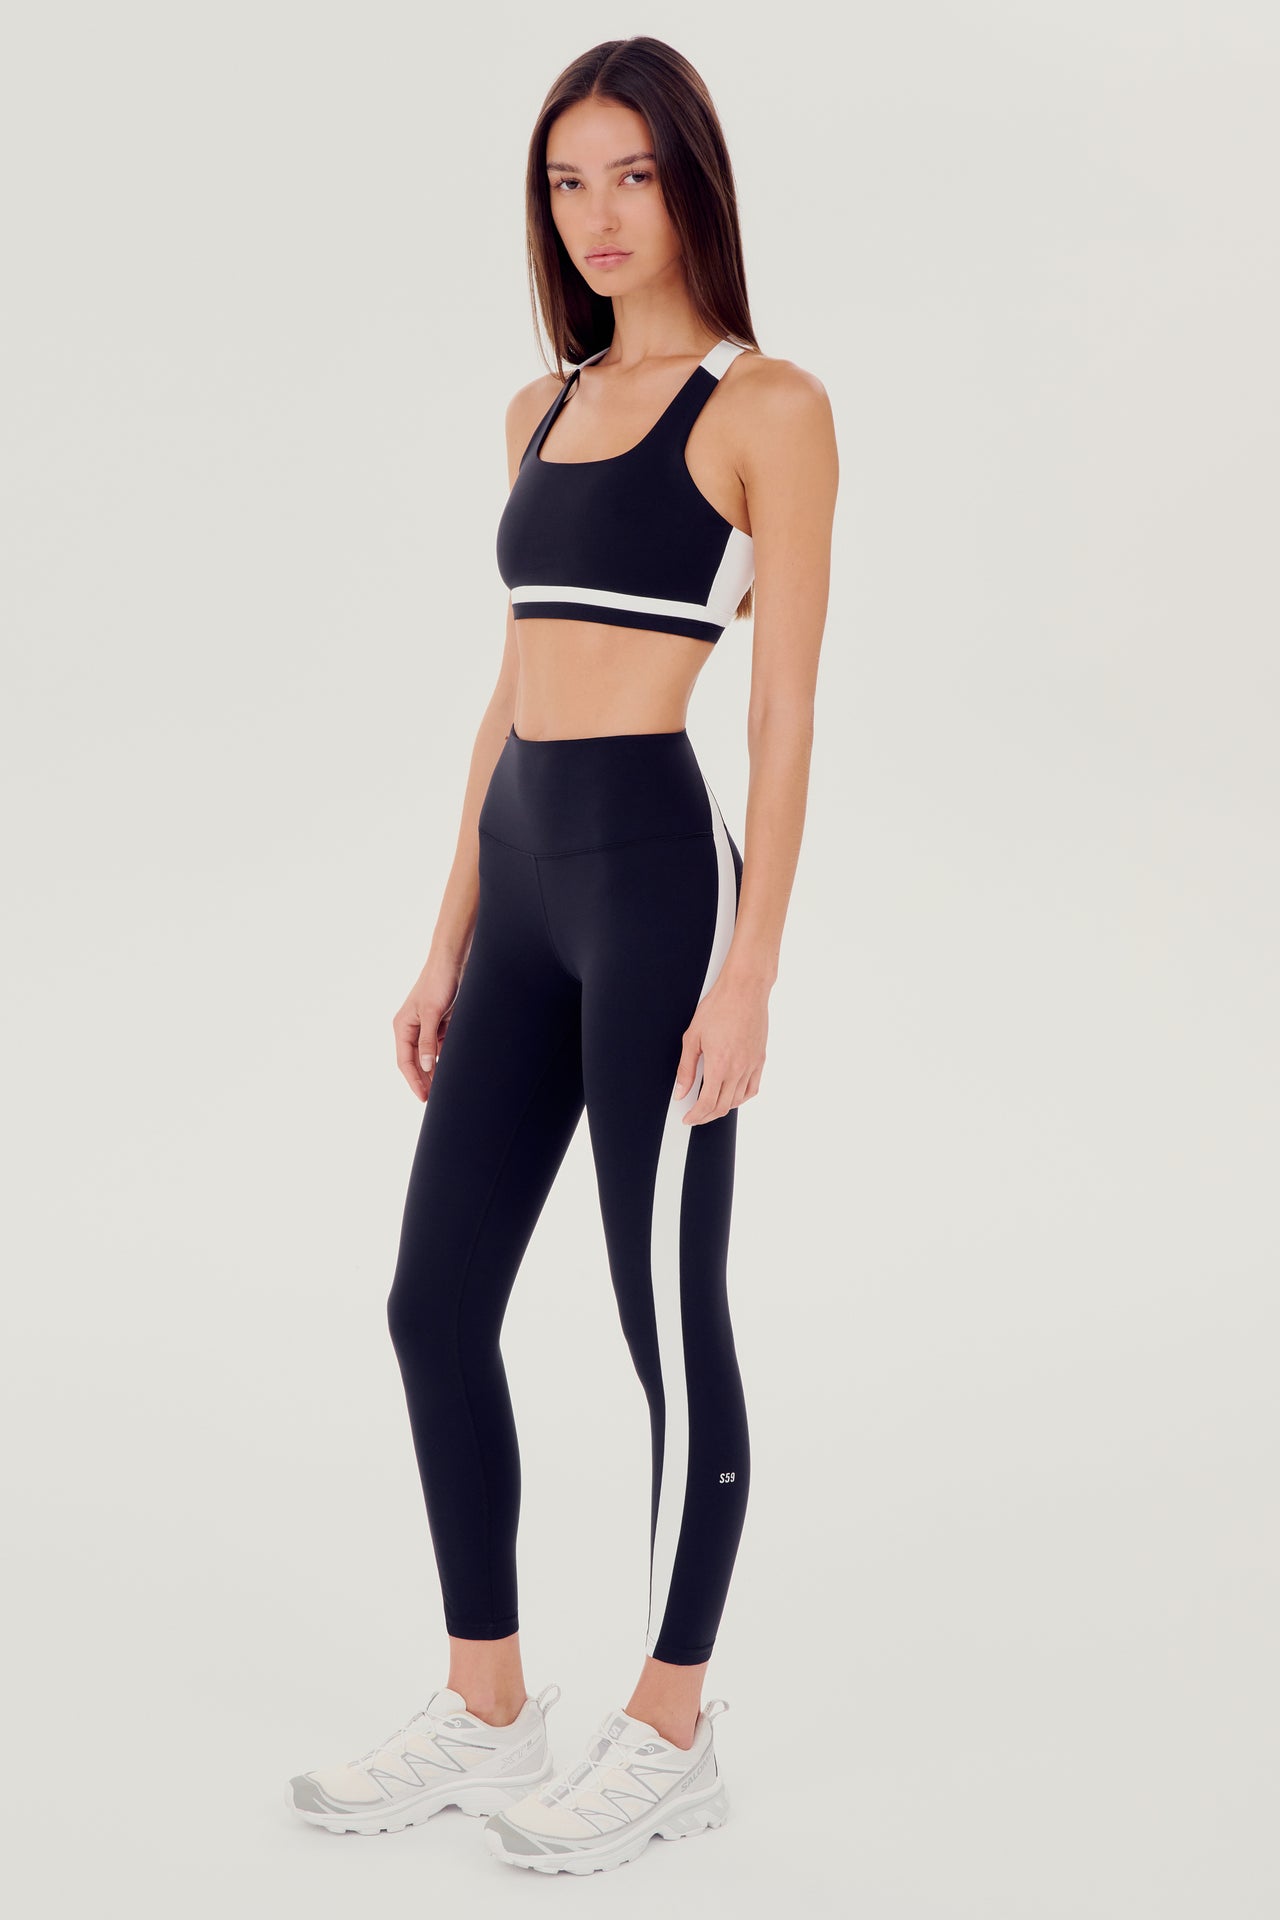 A woman wearing a black and white SPLITS59 Miles High Waist Rigor 7/8 sports bra and leggings suitable for yoga.